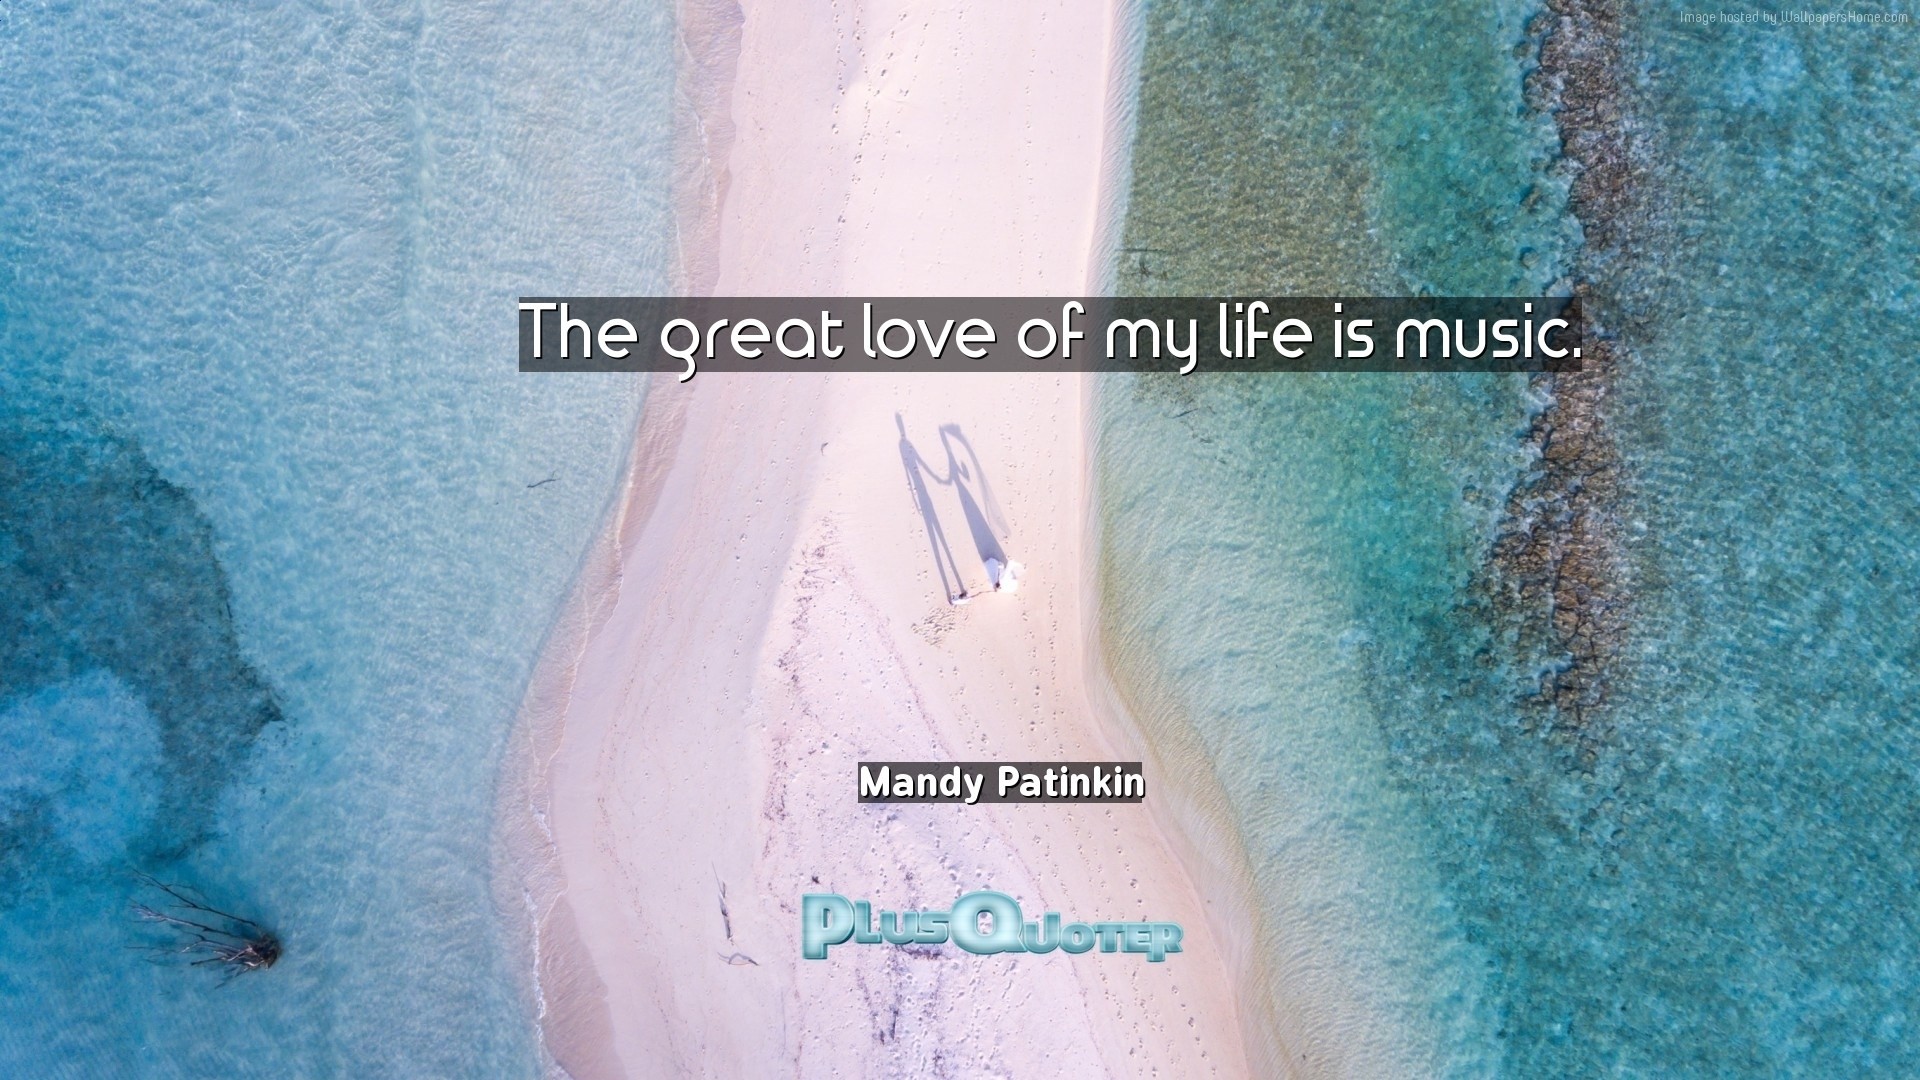 1920x1080 Download Wallpaper with inspirational Quotes- "The great love of my life is  music.